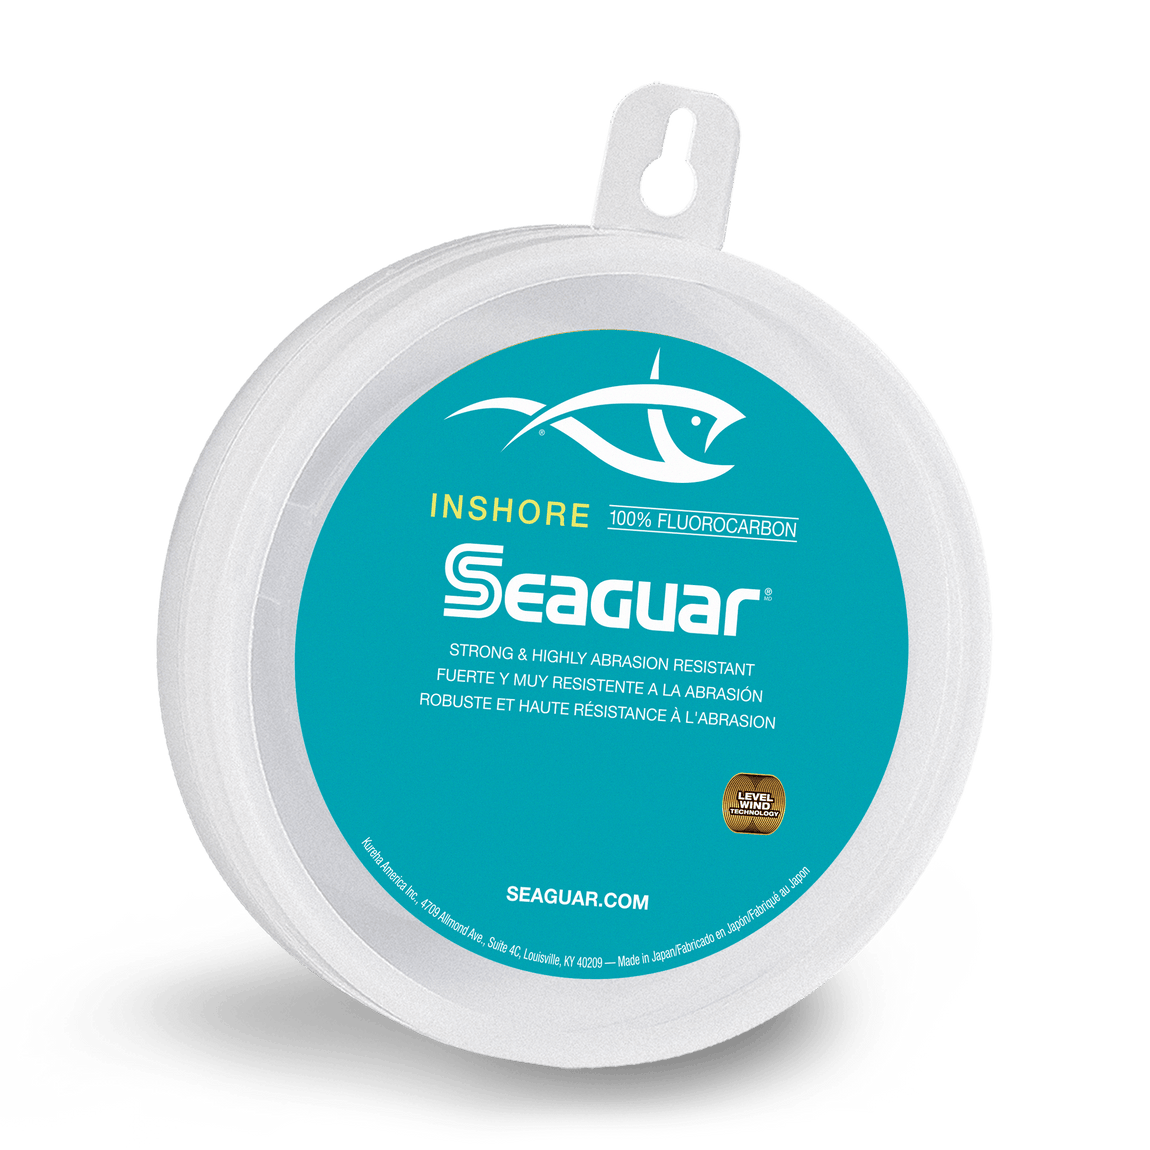 Seaguar Reveals New INSHORE Leader for The Toughest Neighborhood In Town